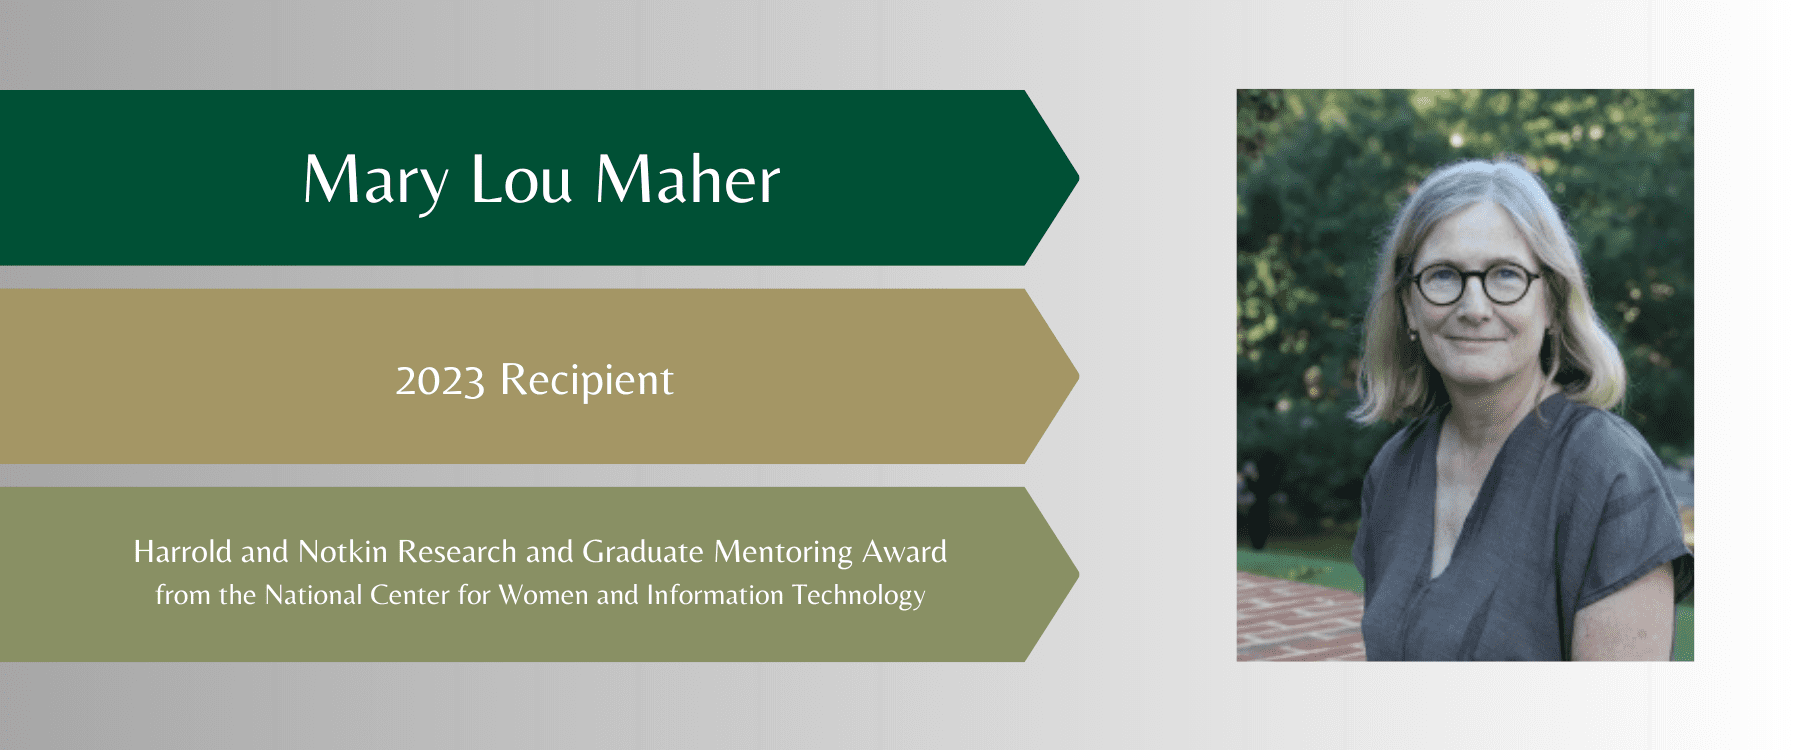 Mary Lou Maher 2023 Recipient: Harrold and Notkin Research and Graduate Mentoring Award from the National Center for Women and Information Technology